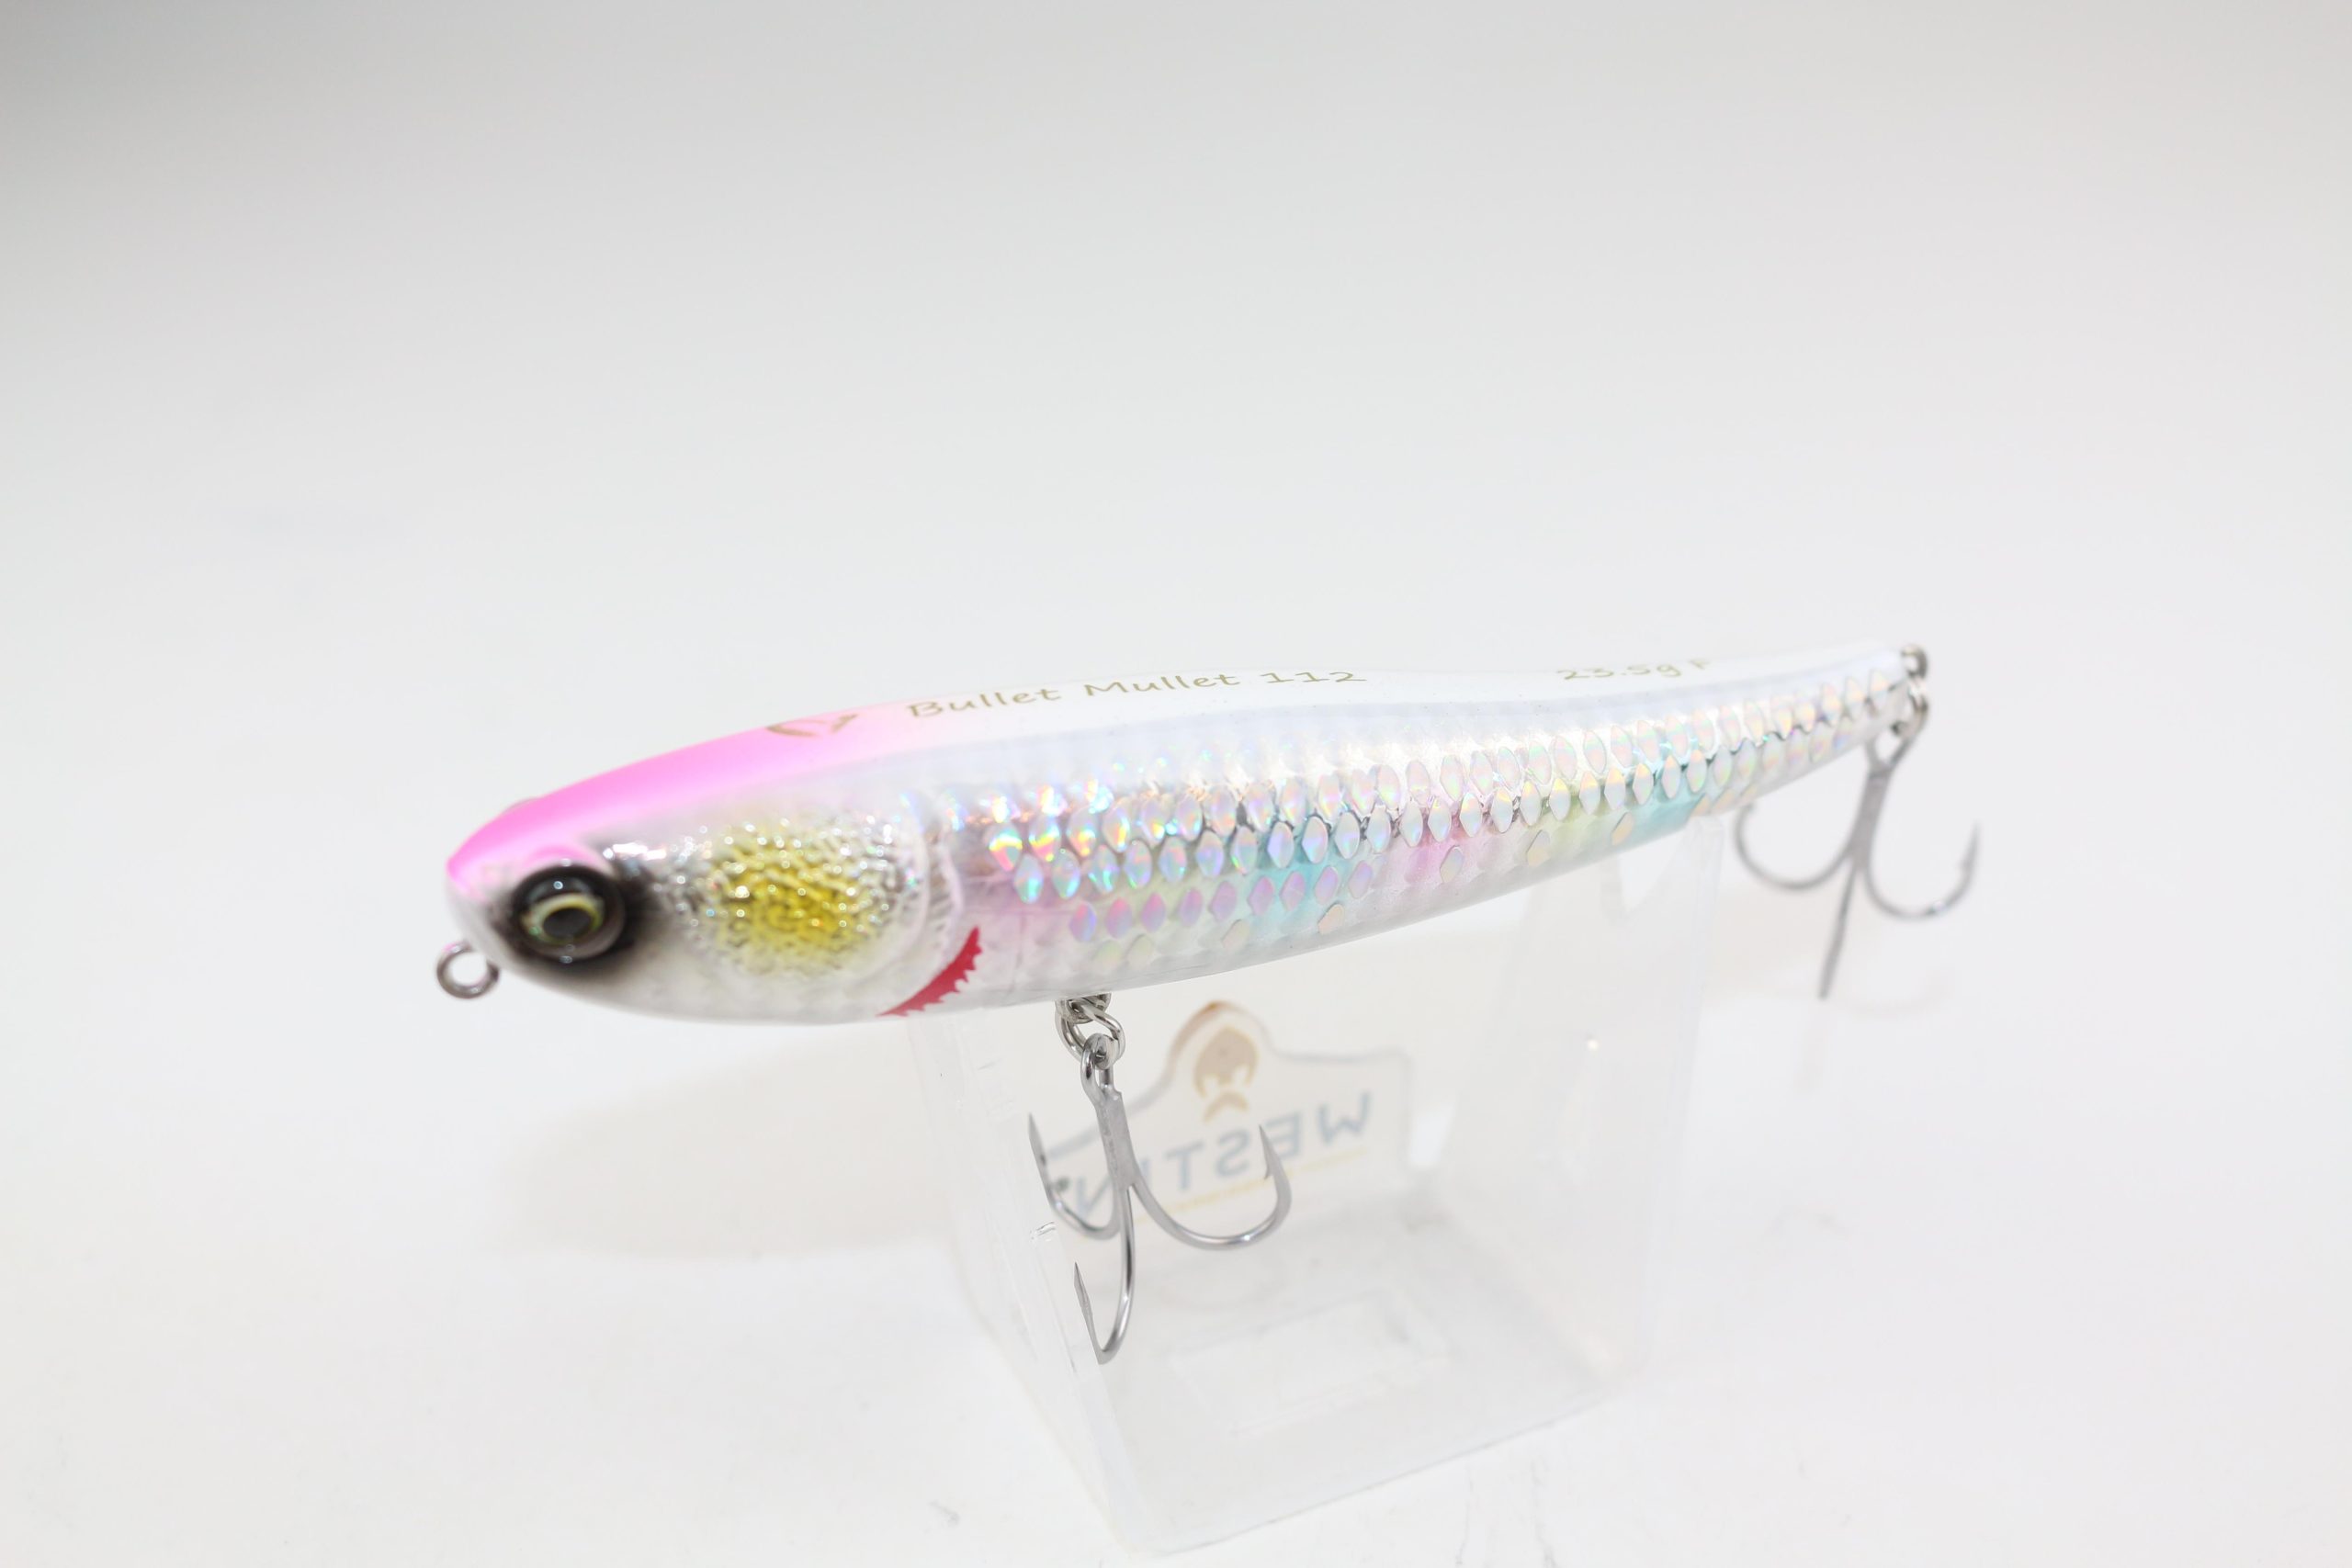 Savage Gear Bullet Mullet - 11.2cm 23.5g - White Candy